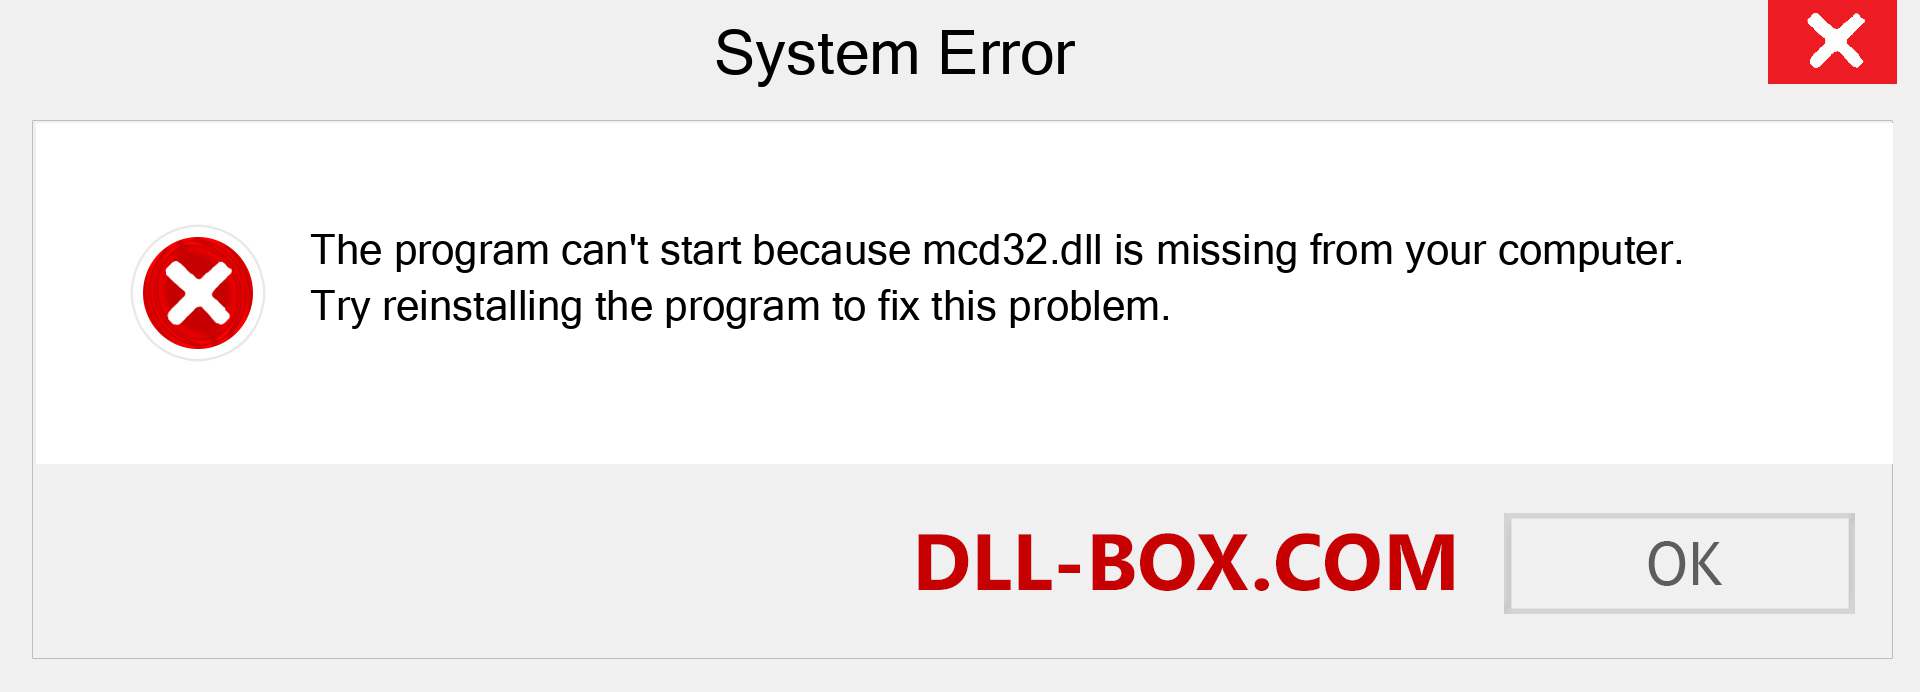  mcd32.dll file is missing?. Download for Windows 7, 8, 10 - Fix  mcd32 dll Missing Error on Windows, photos, images